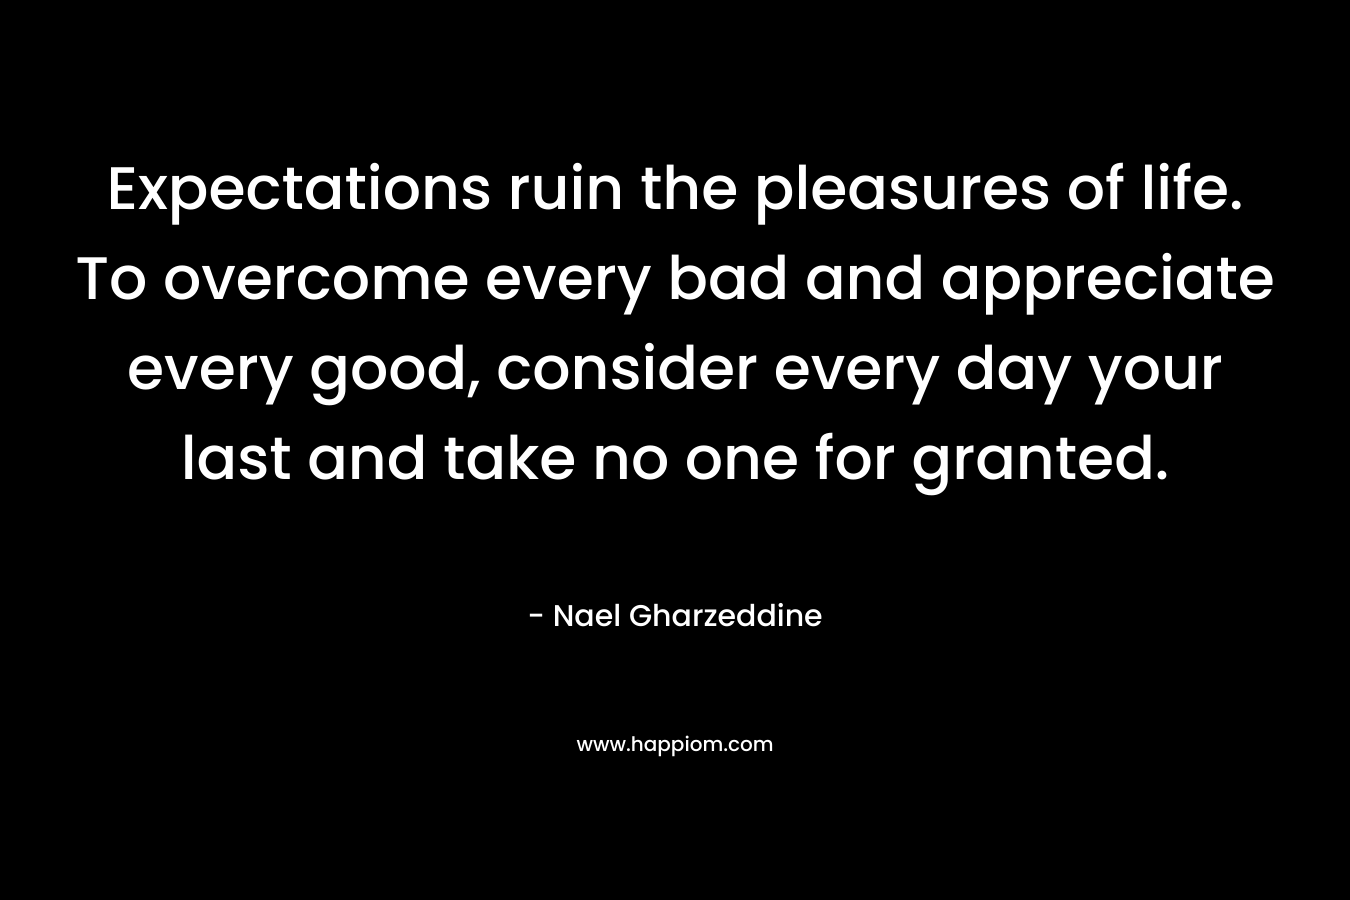 Expectations ruin the pleasures of life. To overcome every bad and appreciate every good, consider every day your last and take no one for granted.